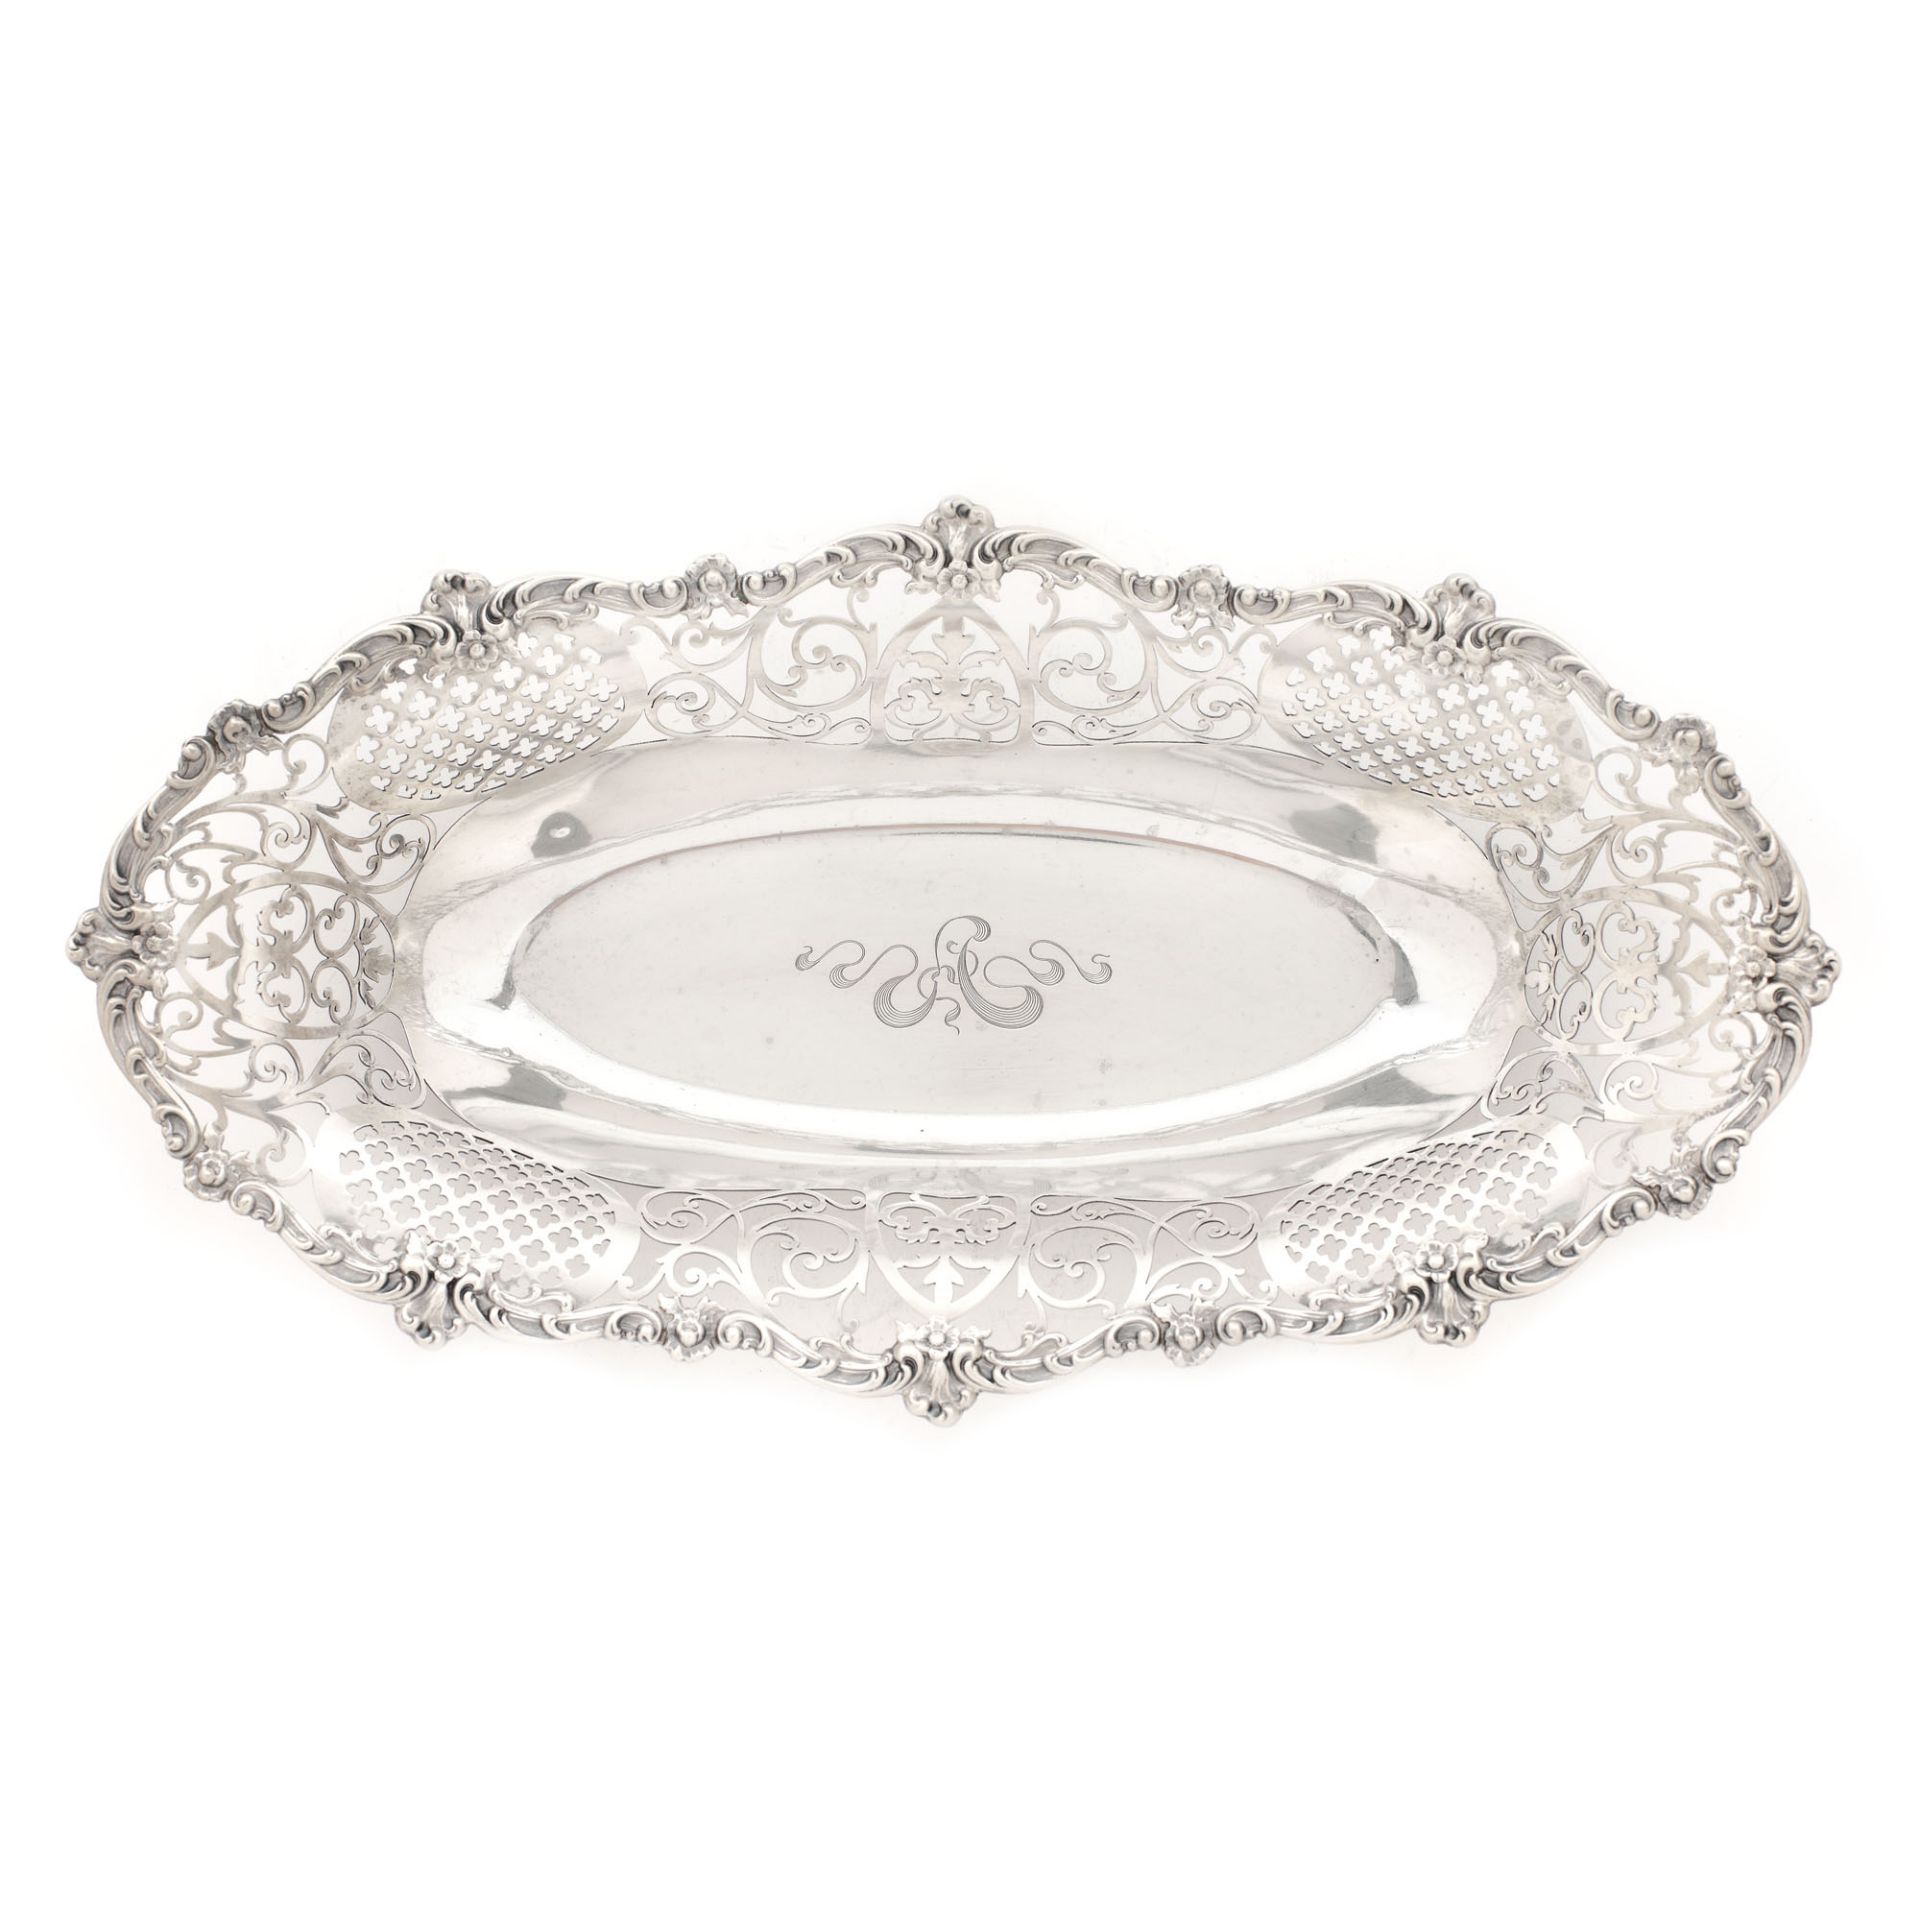 American workshop, Gorham silver fruit bowl with hand-perforated decoration, approx. 1906 - Image 2 of 4